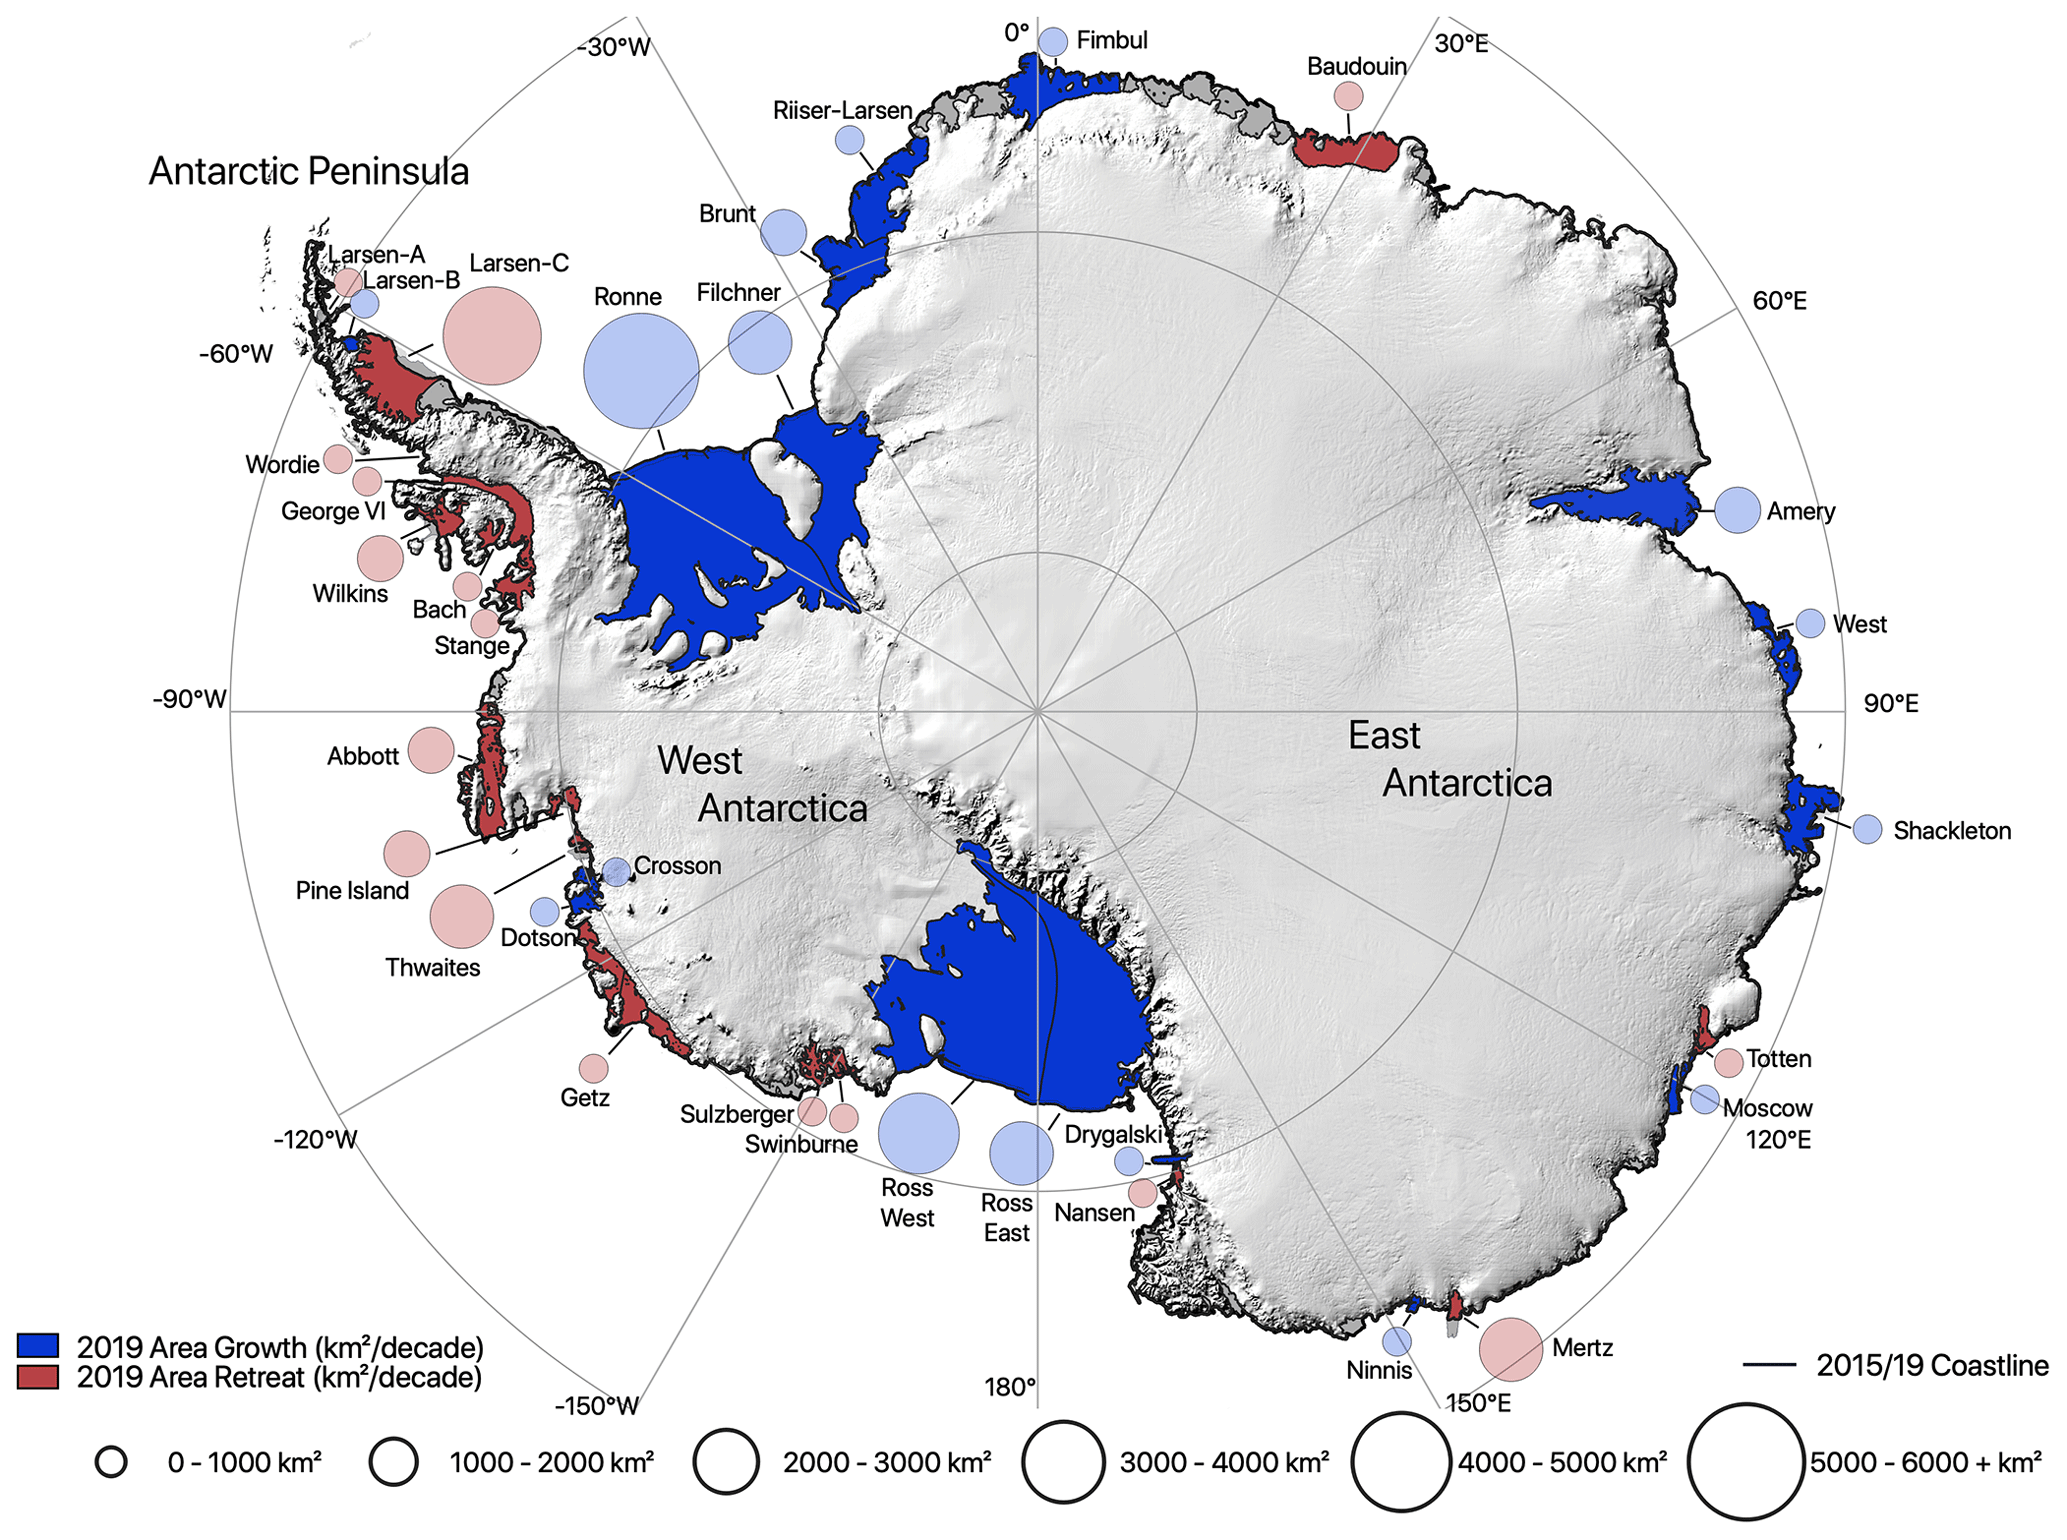 TC - Change in Antarctic ice shelf area from 2009 to 2019